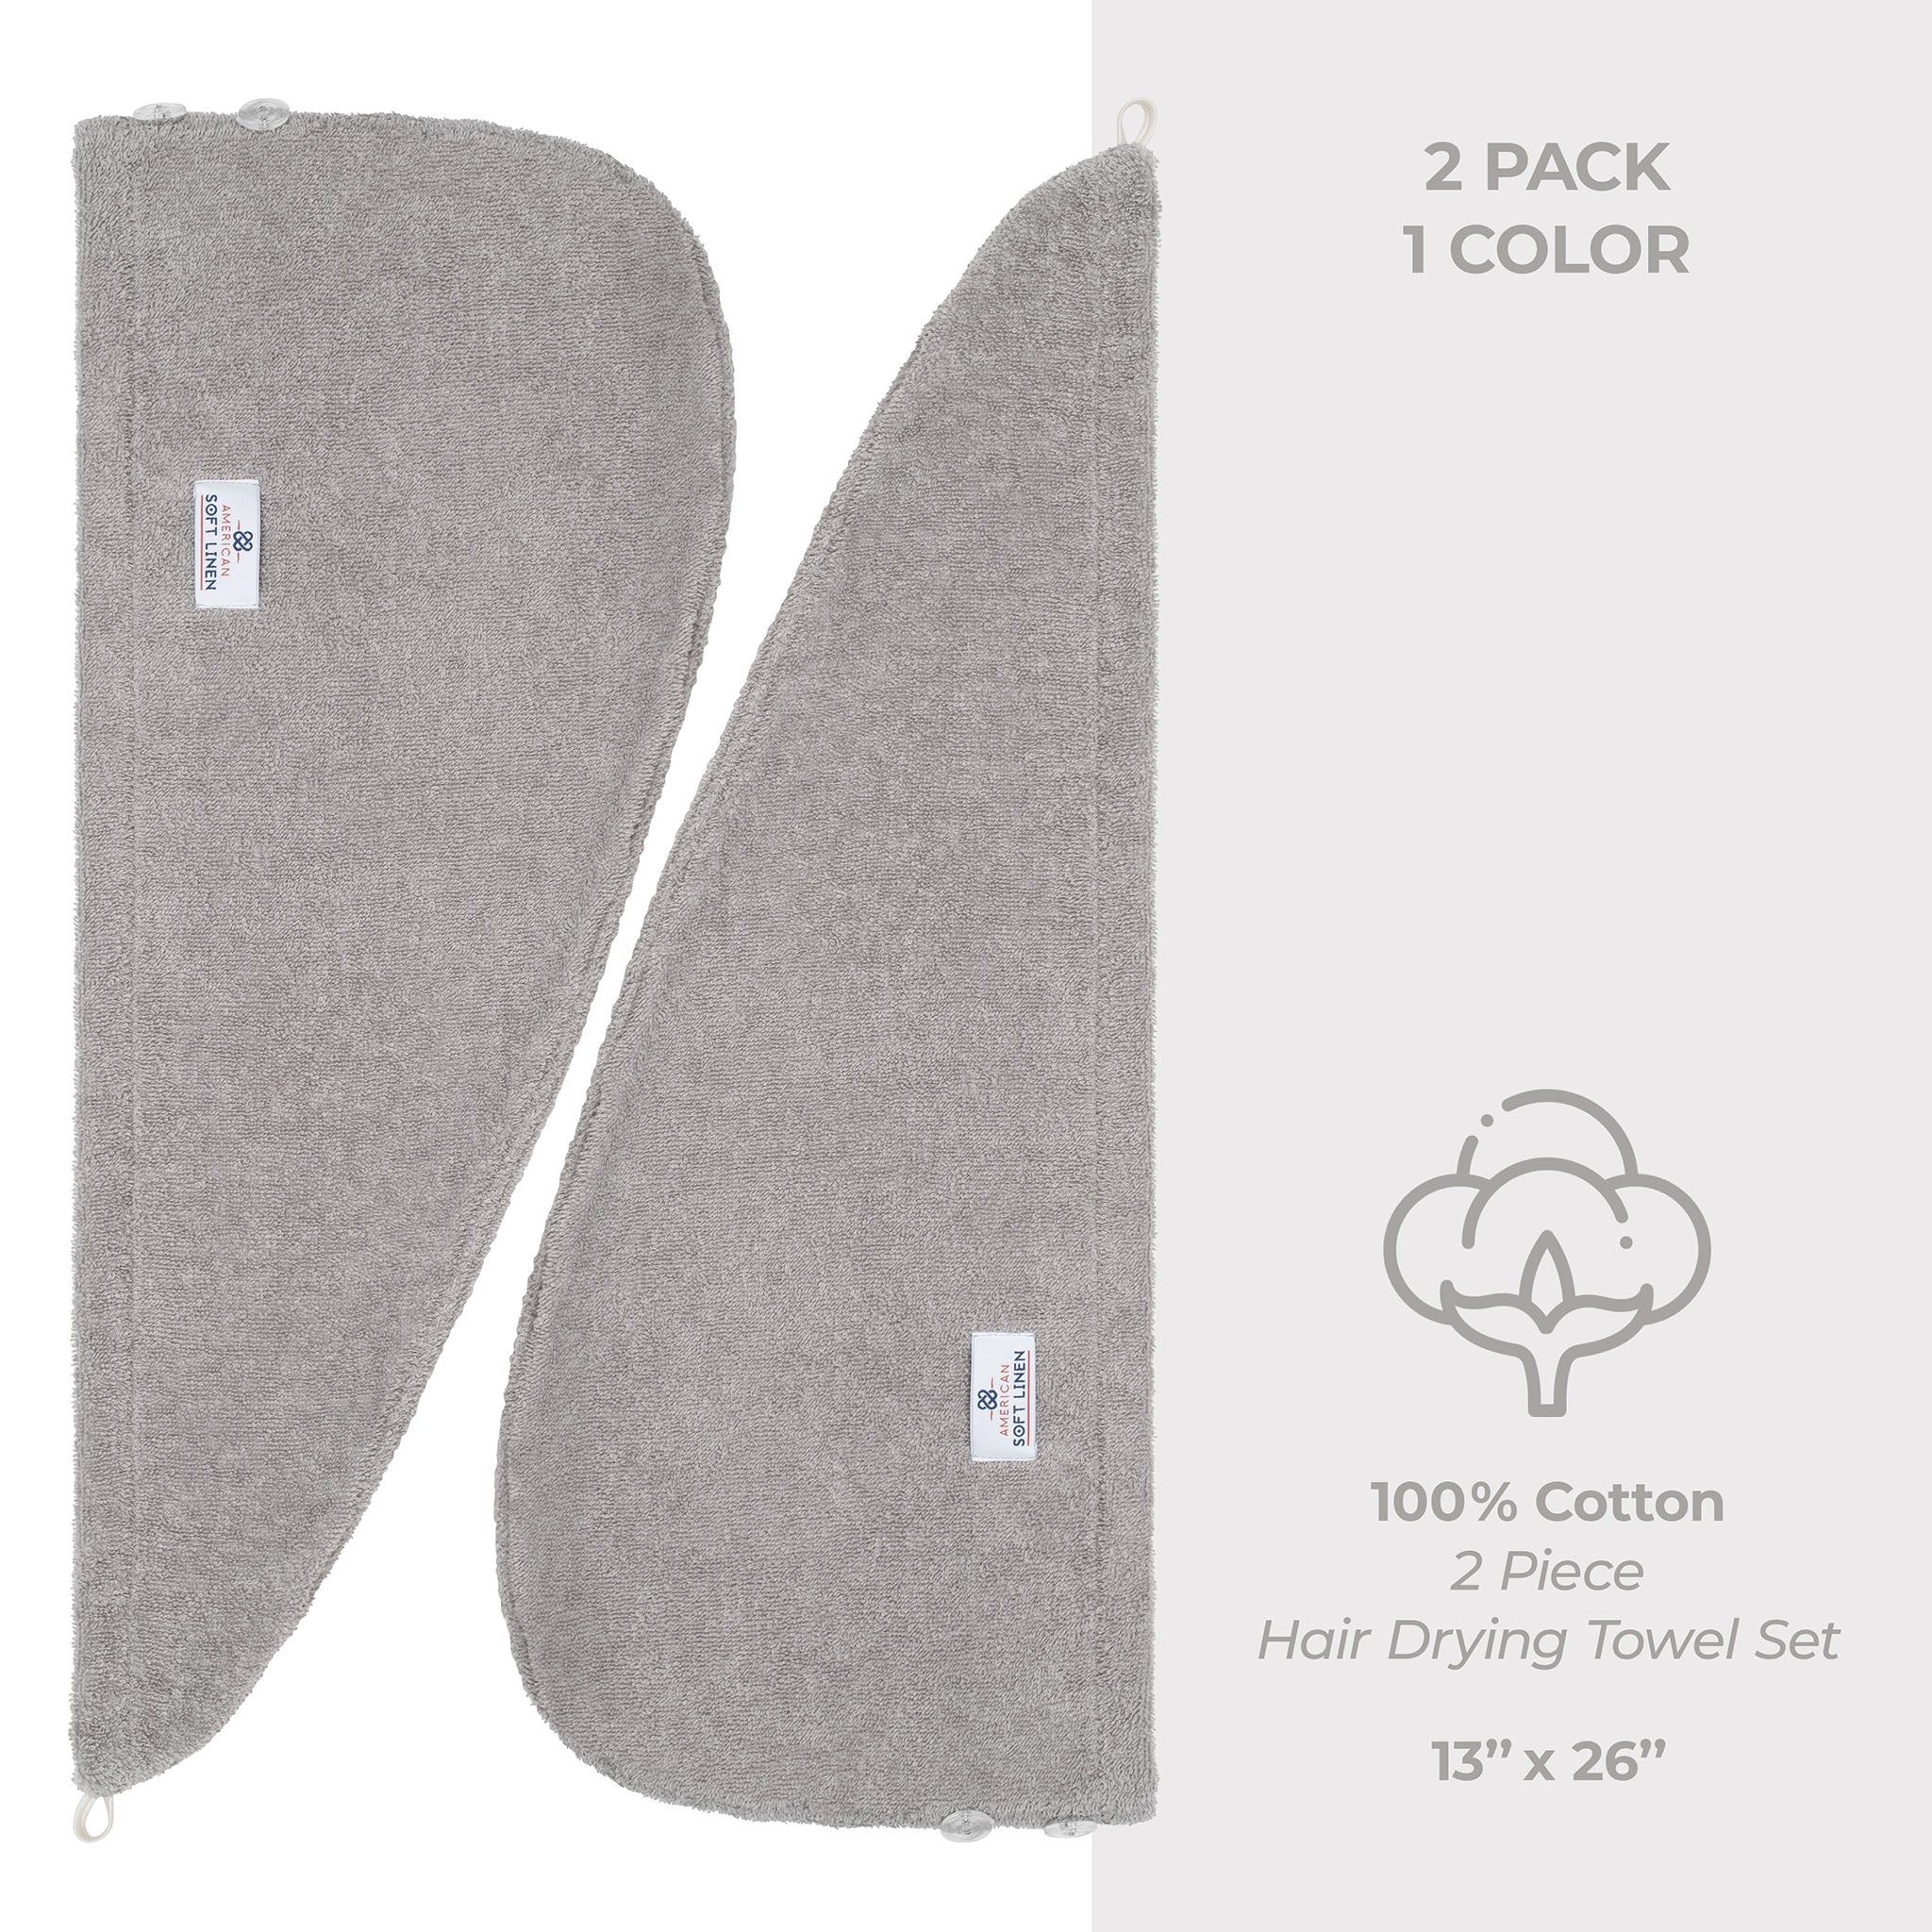 American Soft Linen 100% Cotton Hair Drying Towels for Women 2 pack 75 set case pack rockridge gray-4